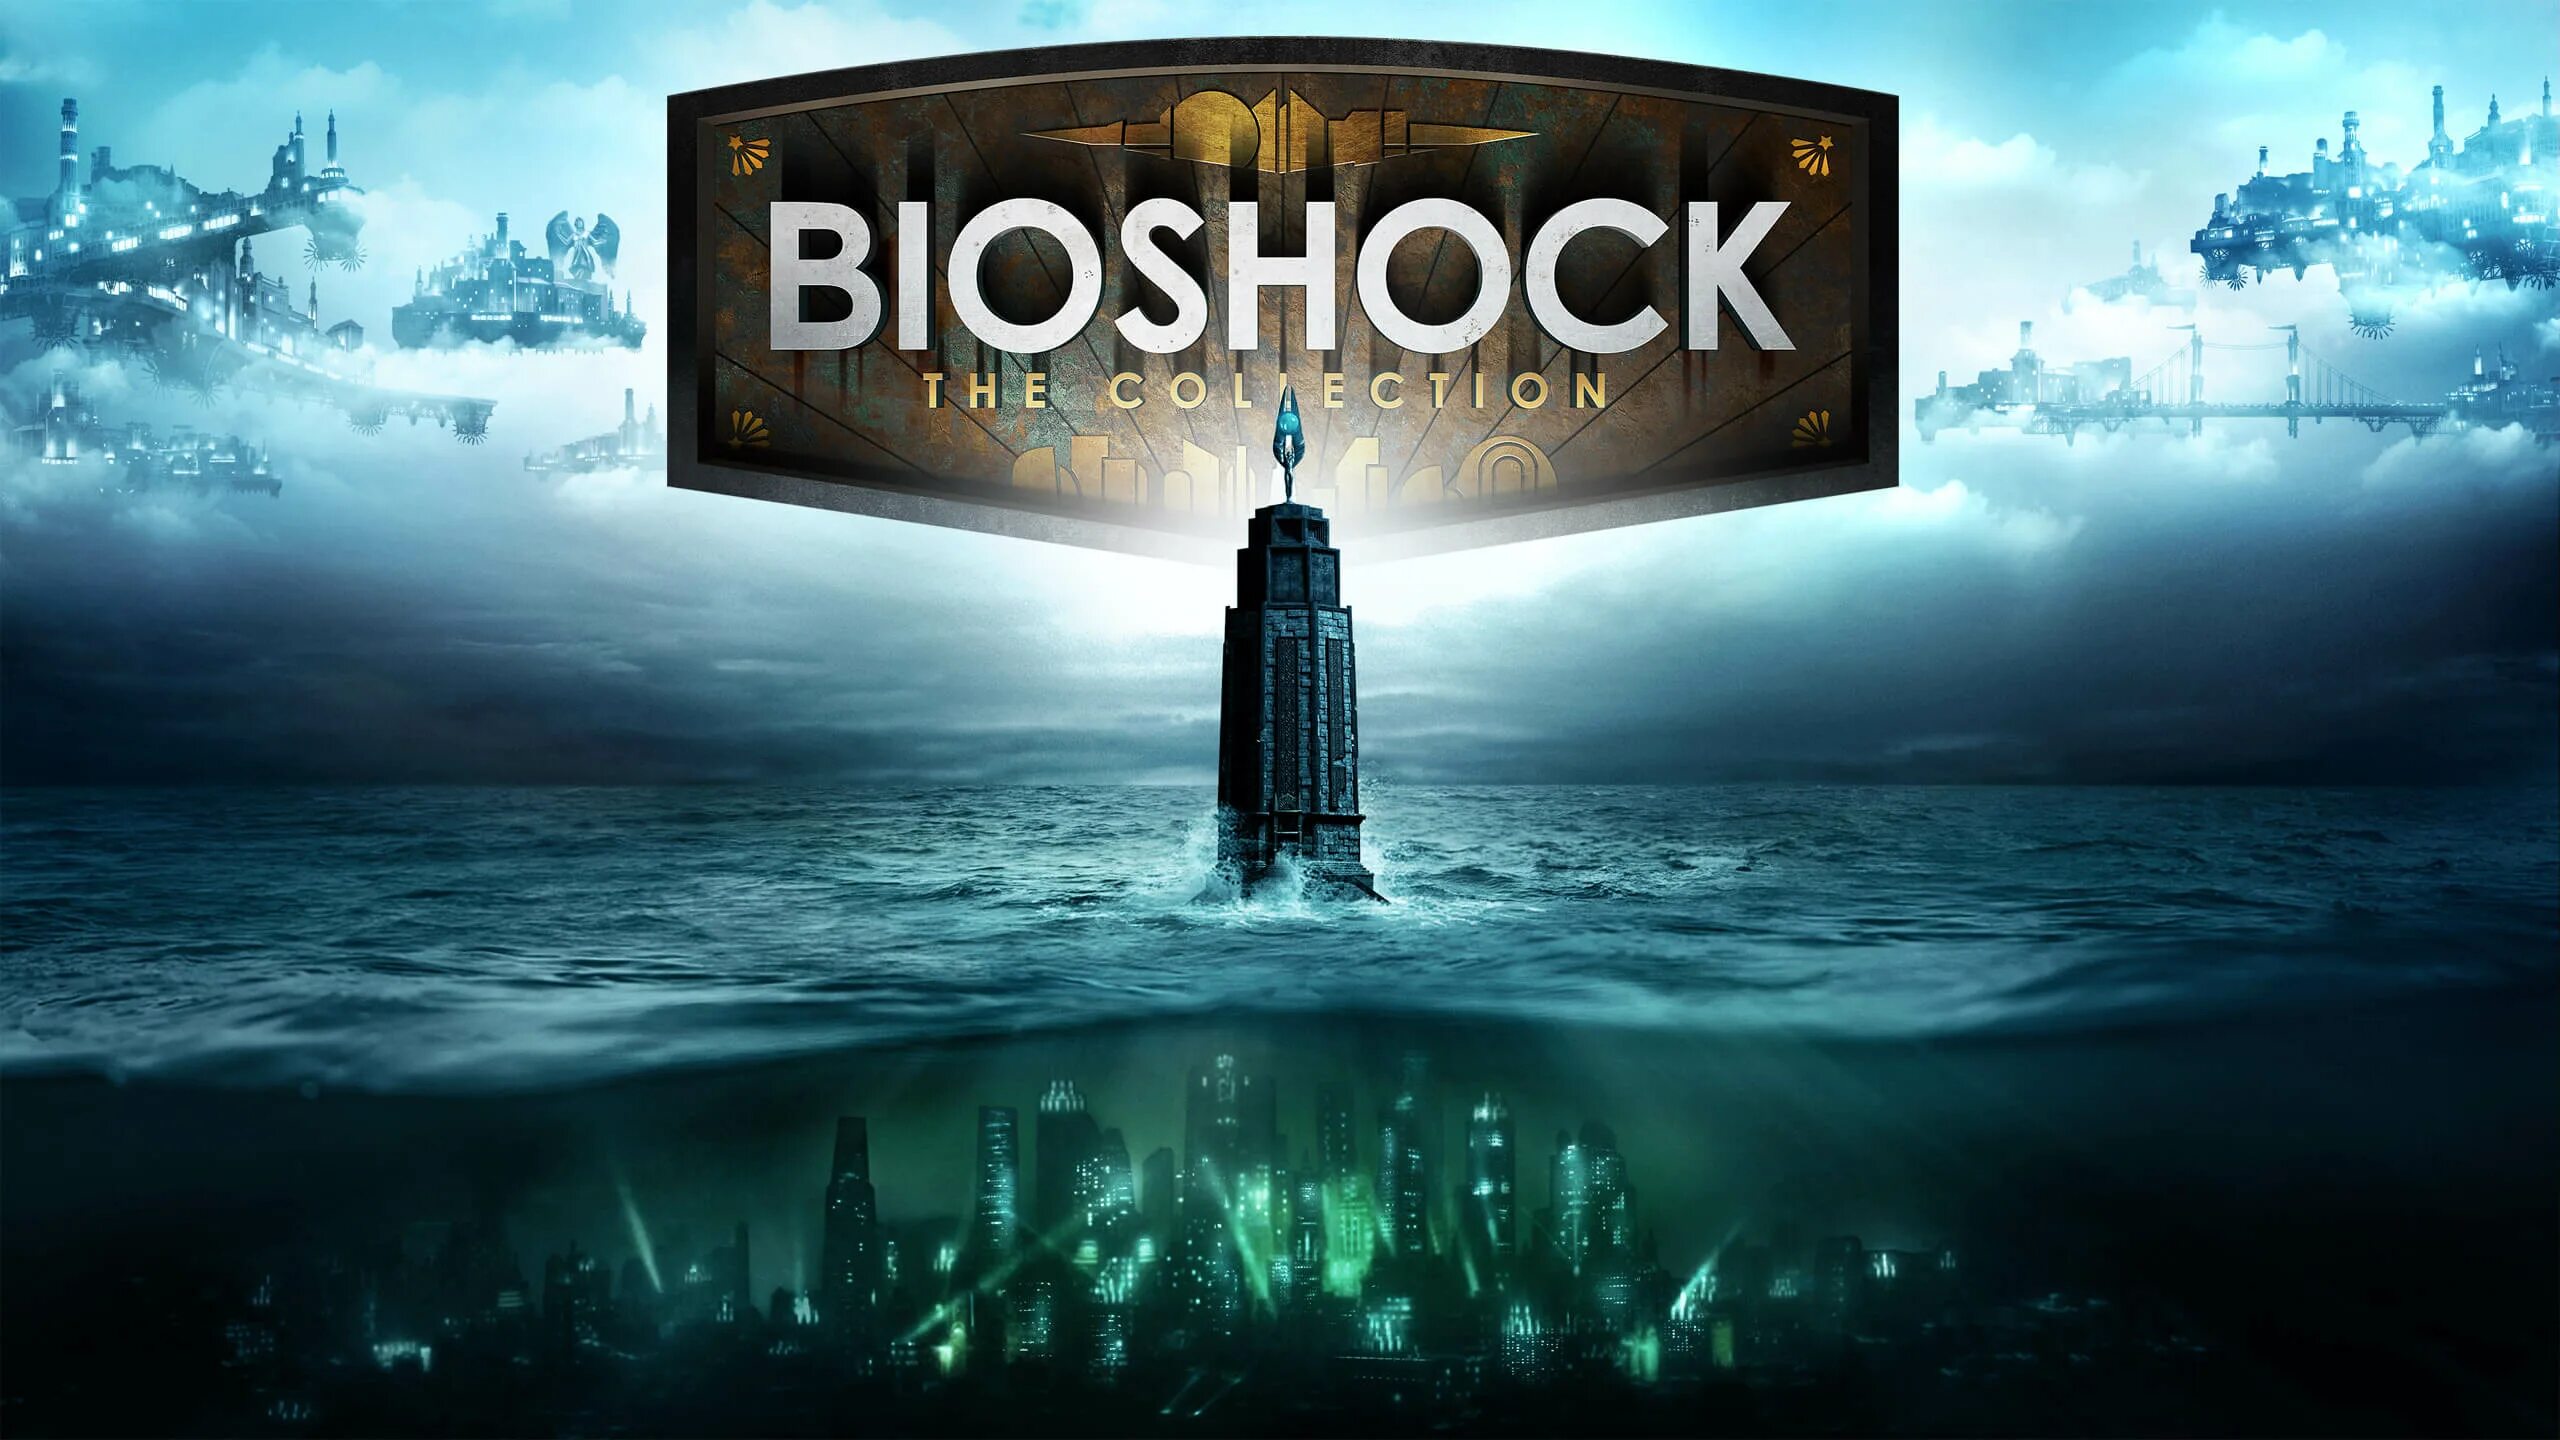 The first collection 4. Bioshock: the collection (ps4). Bioshock 2 Remastered. Bioshock 1 Remastered. Bioshock 1 Постер.